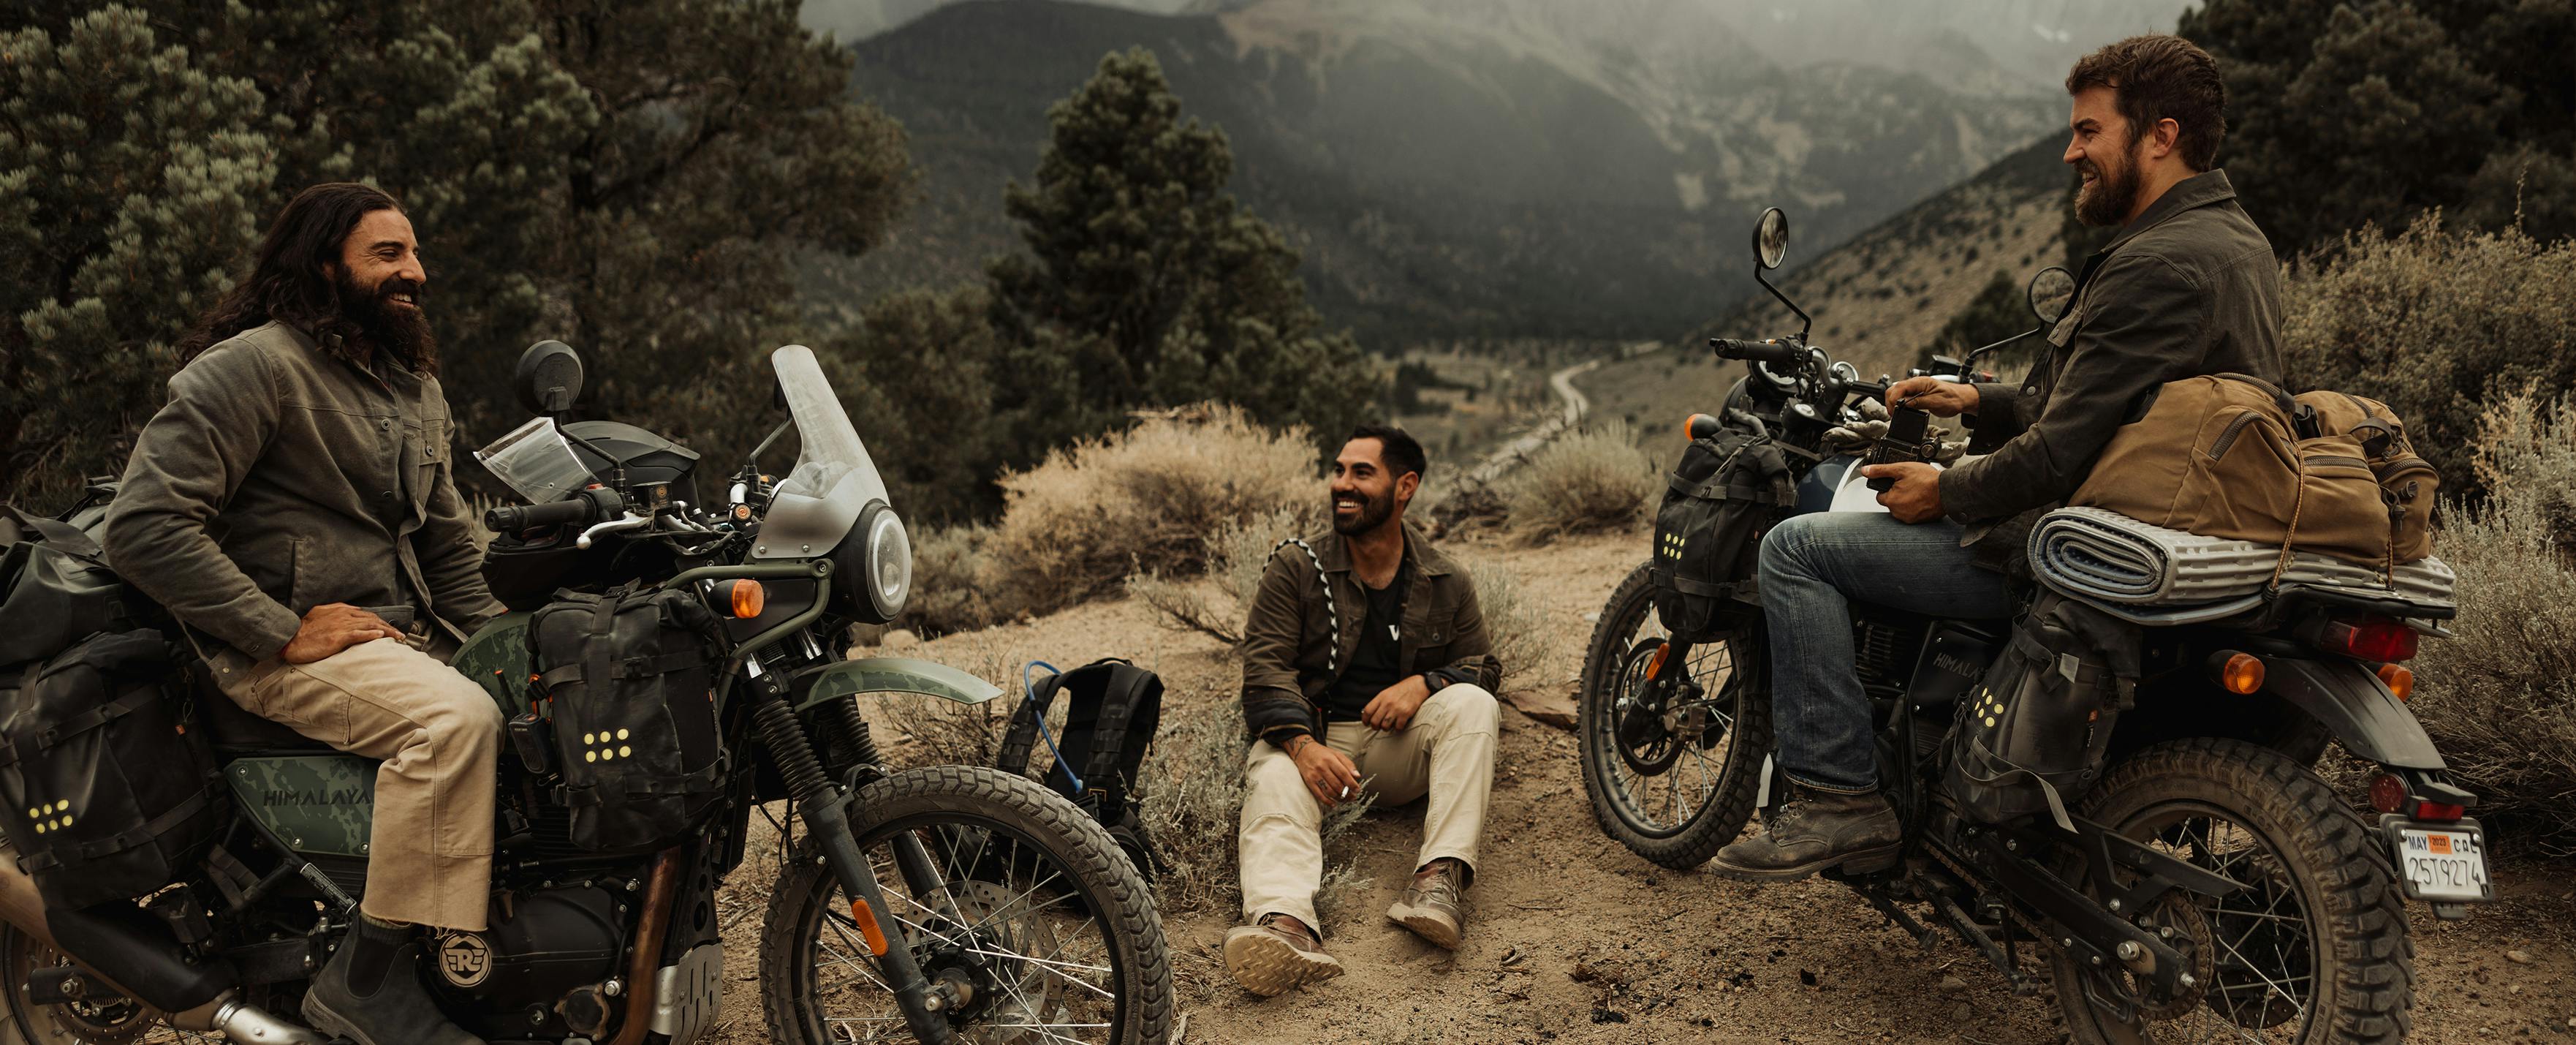 Men sitting in mountains on motorcycles chatting